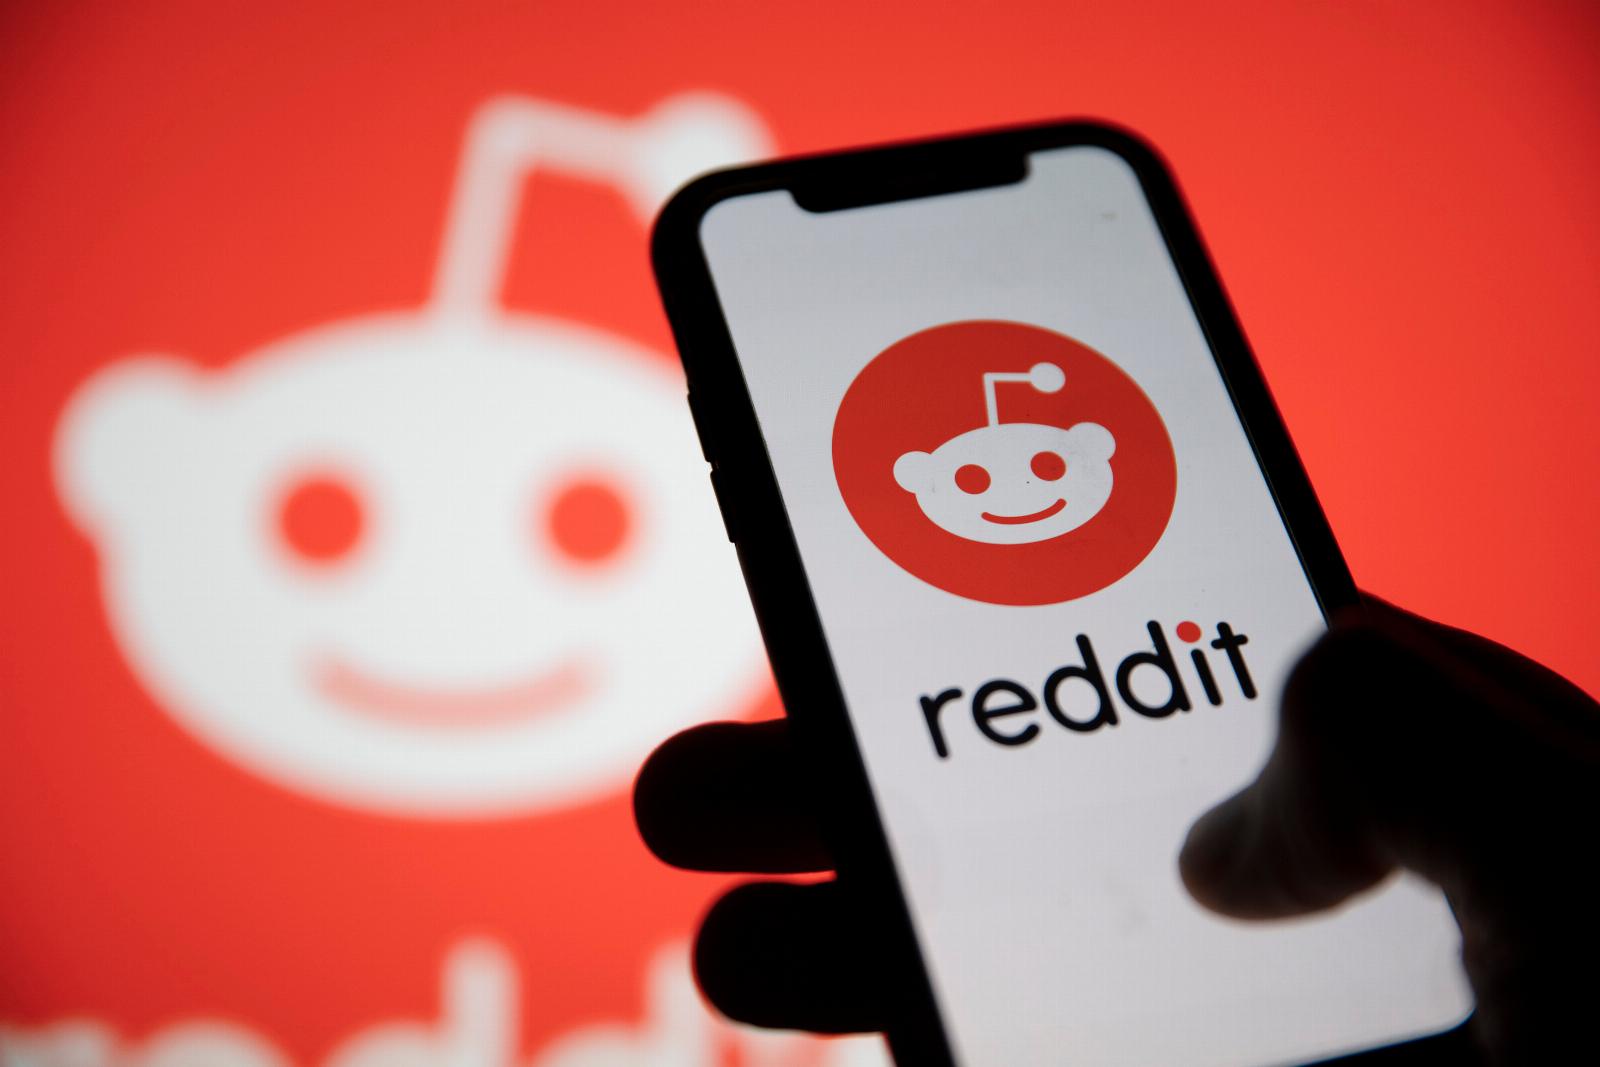 Reddit will allow users to upload NSFW images from desktop